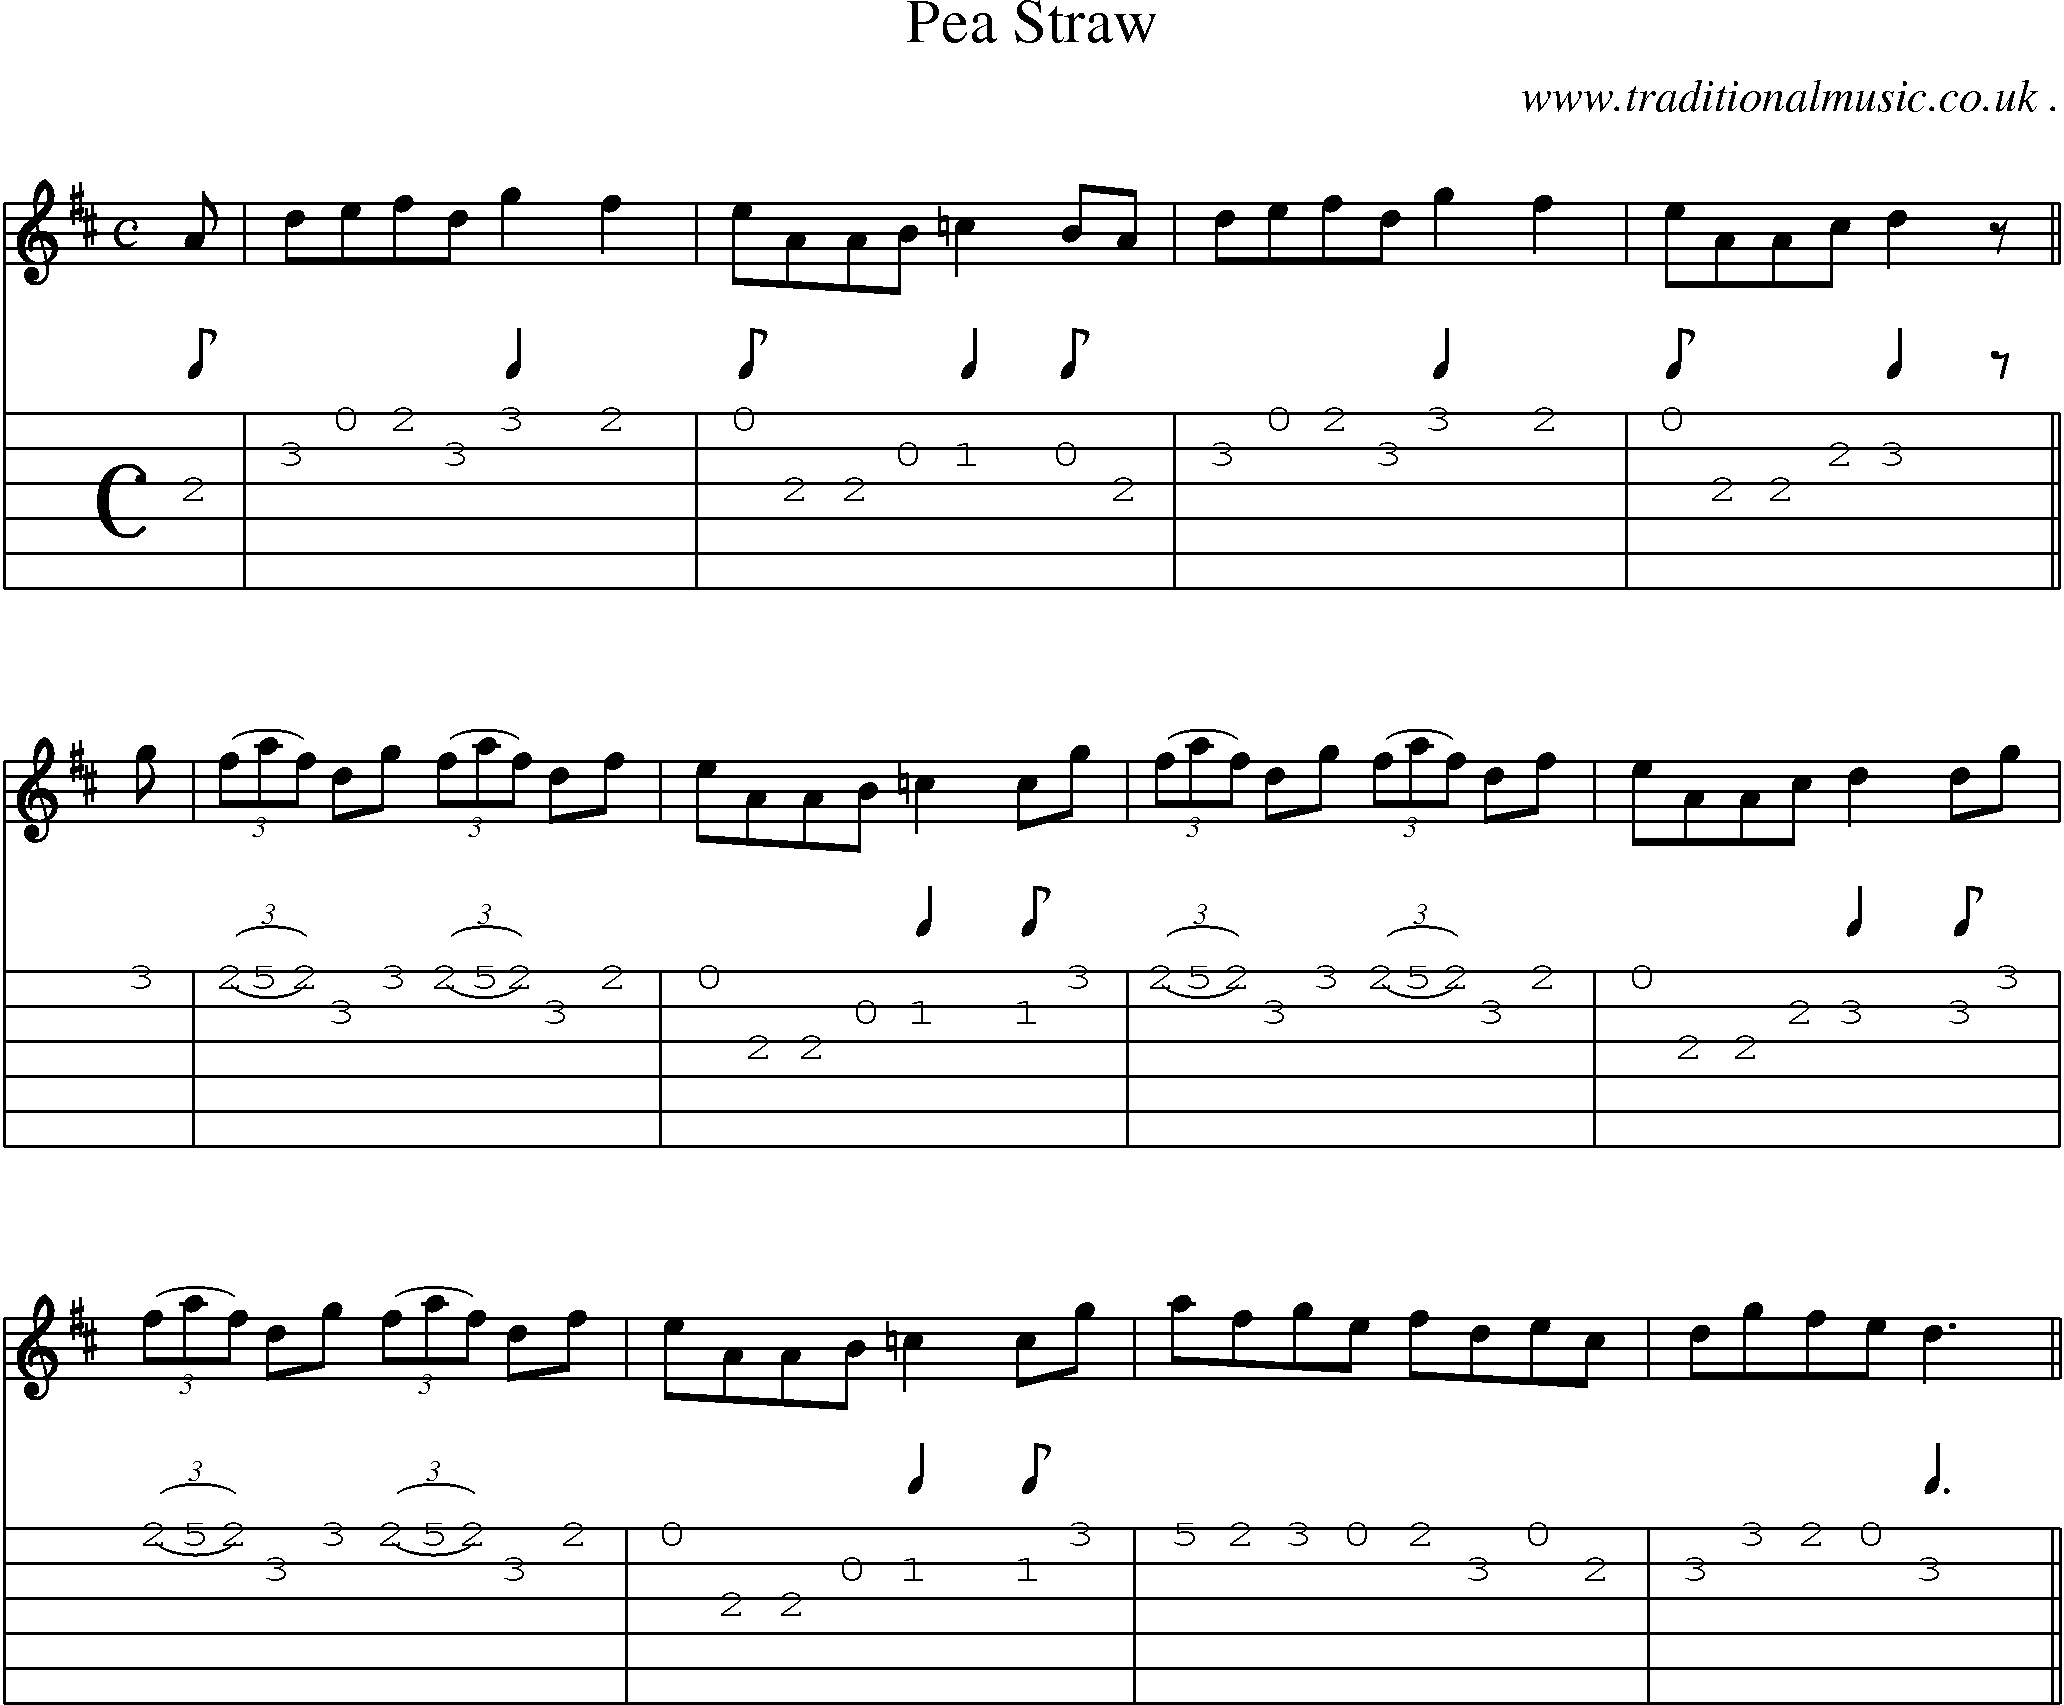 Sheet-Music and Guitar Tabs for Pea Straw